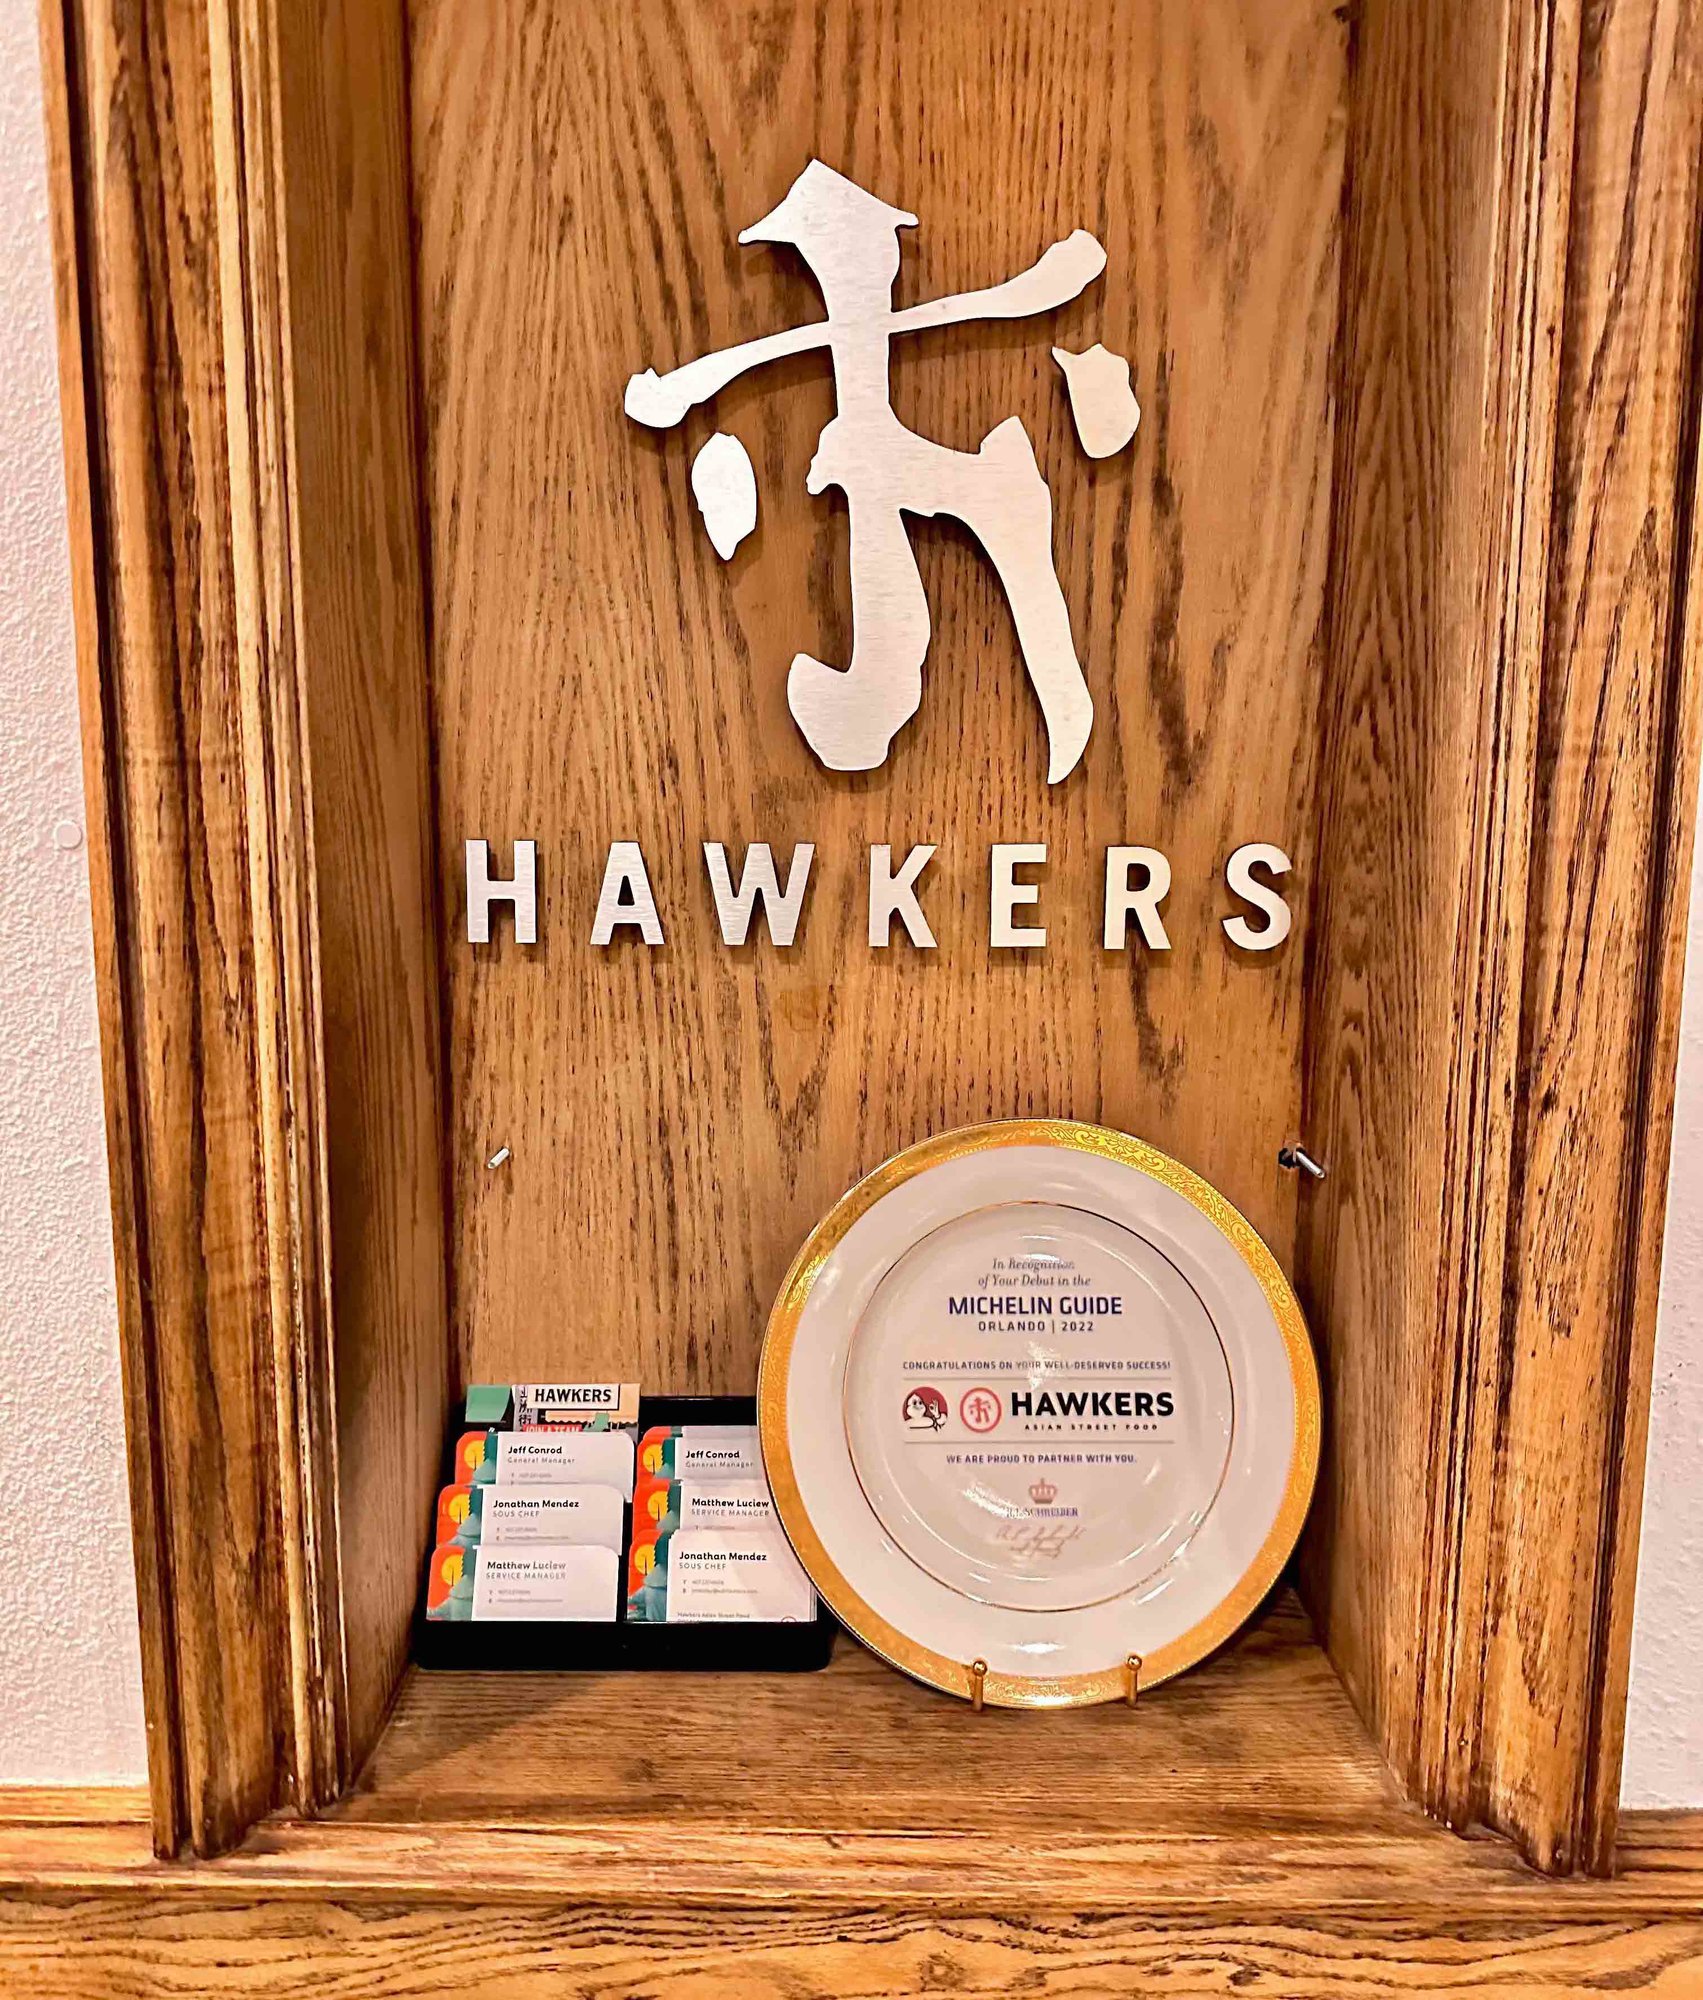 hawkers sign with wood background and michelin guide plate award